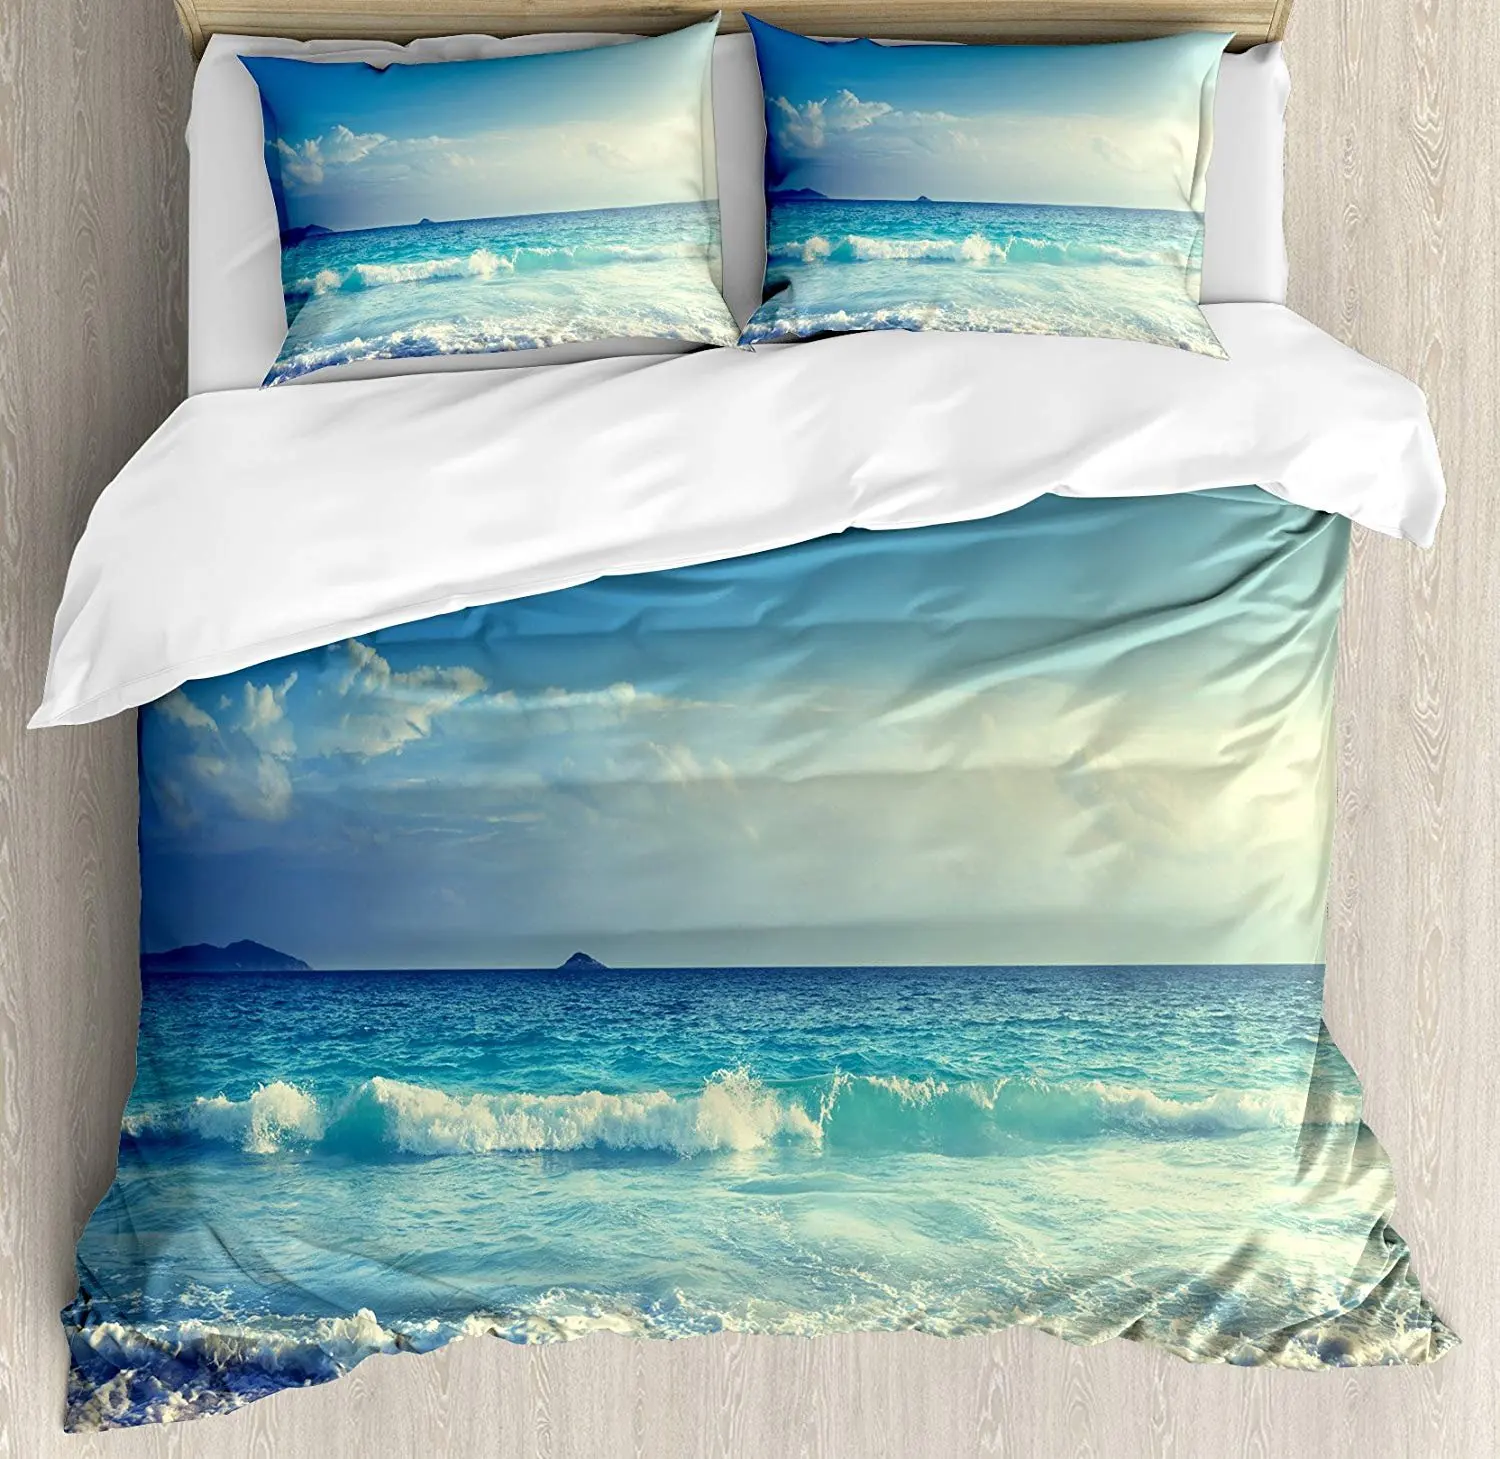 

Ocean Bedding Set Tropical Island Paradise Beach at Sunset Time Waves the Misty Sea Duvet Cover Pillowcase Bedclothes Bed Set